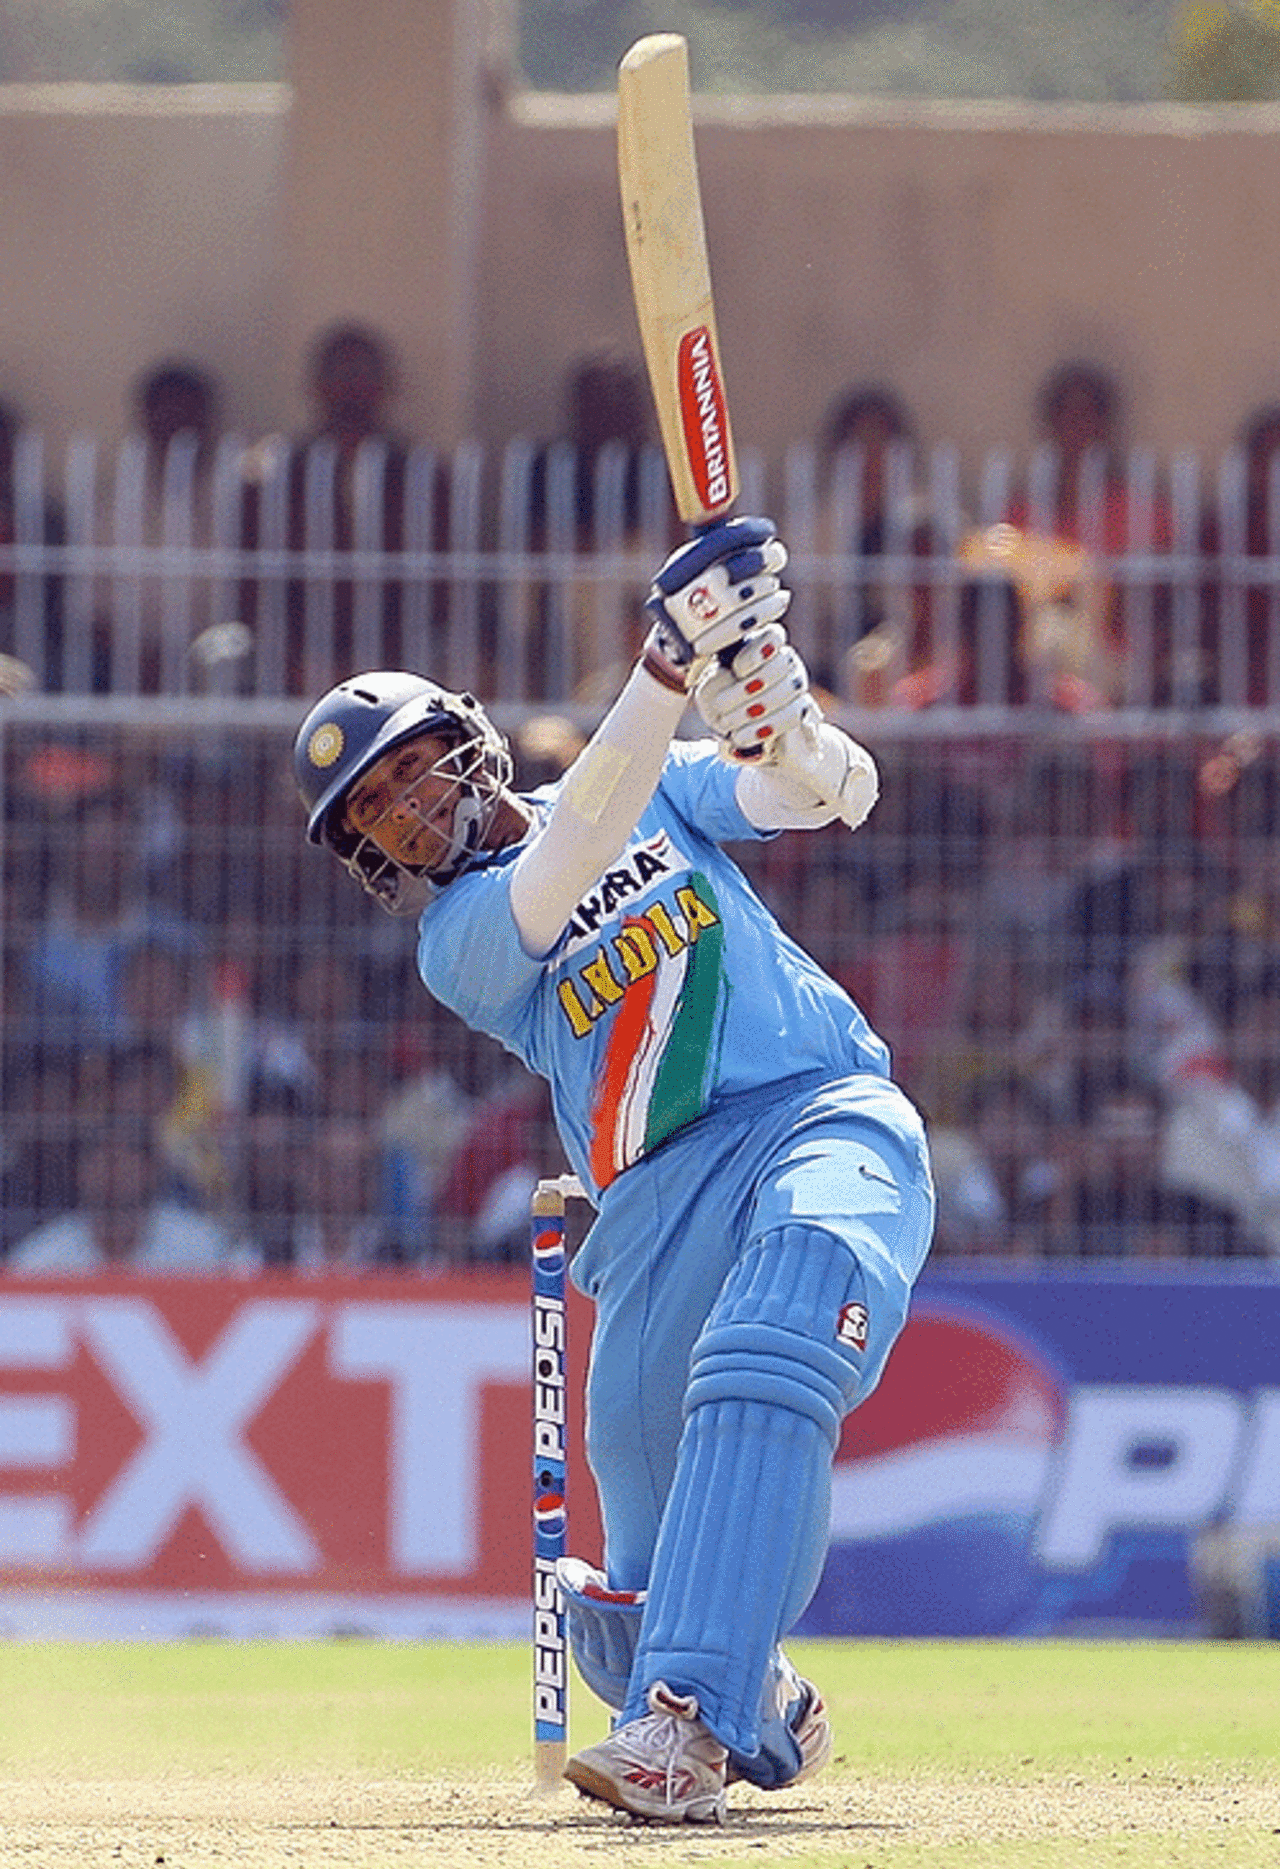 Rahul Dravid heaves one for six on his way to 54 off 35 balls, India v West Indies, 1st ODI, Nagpur, January 21, 2007